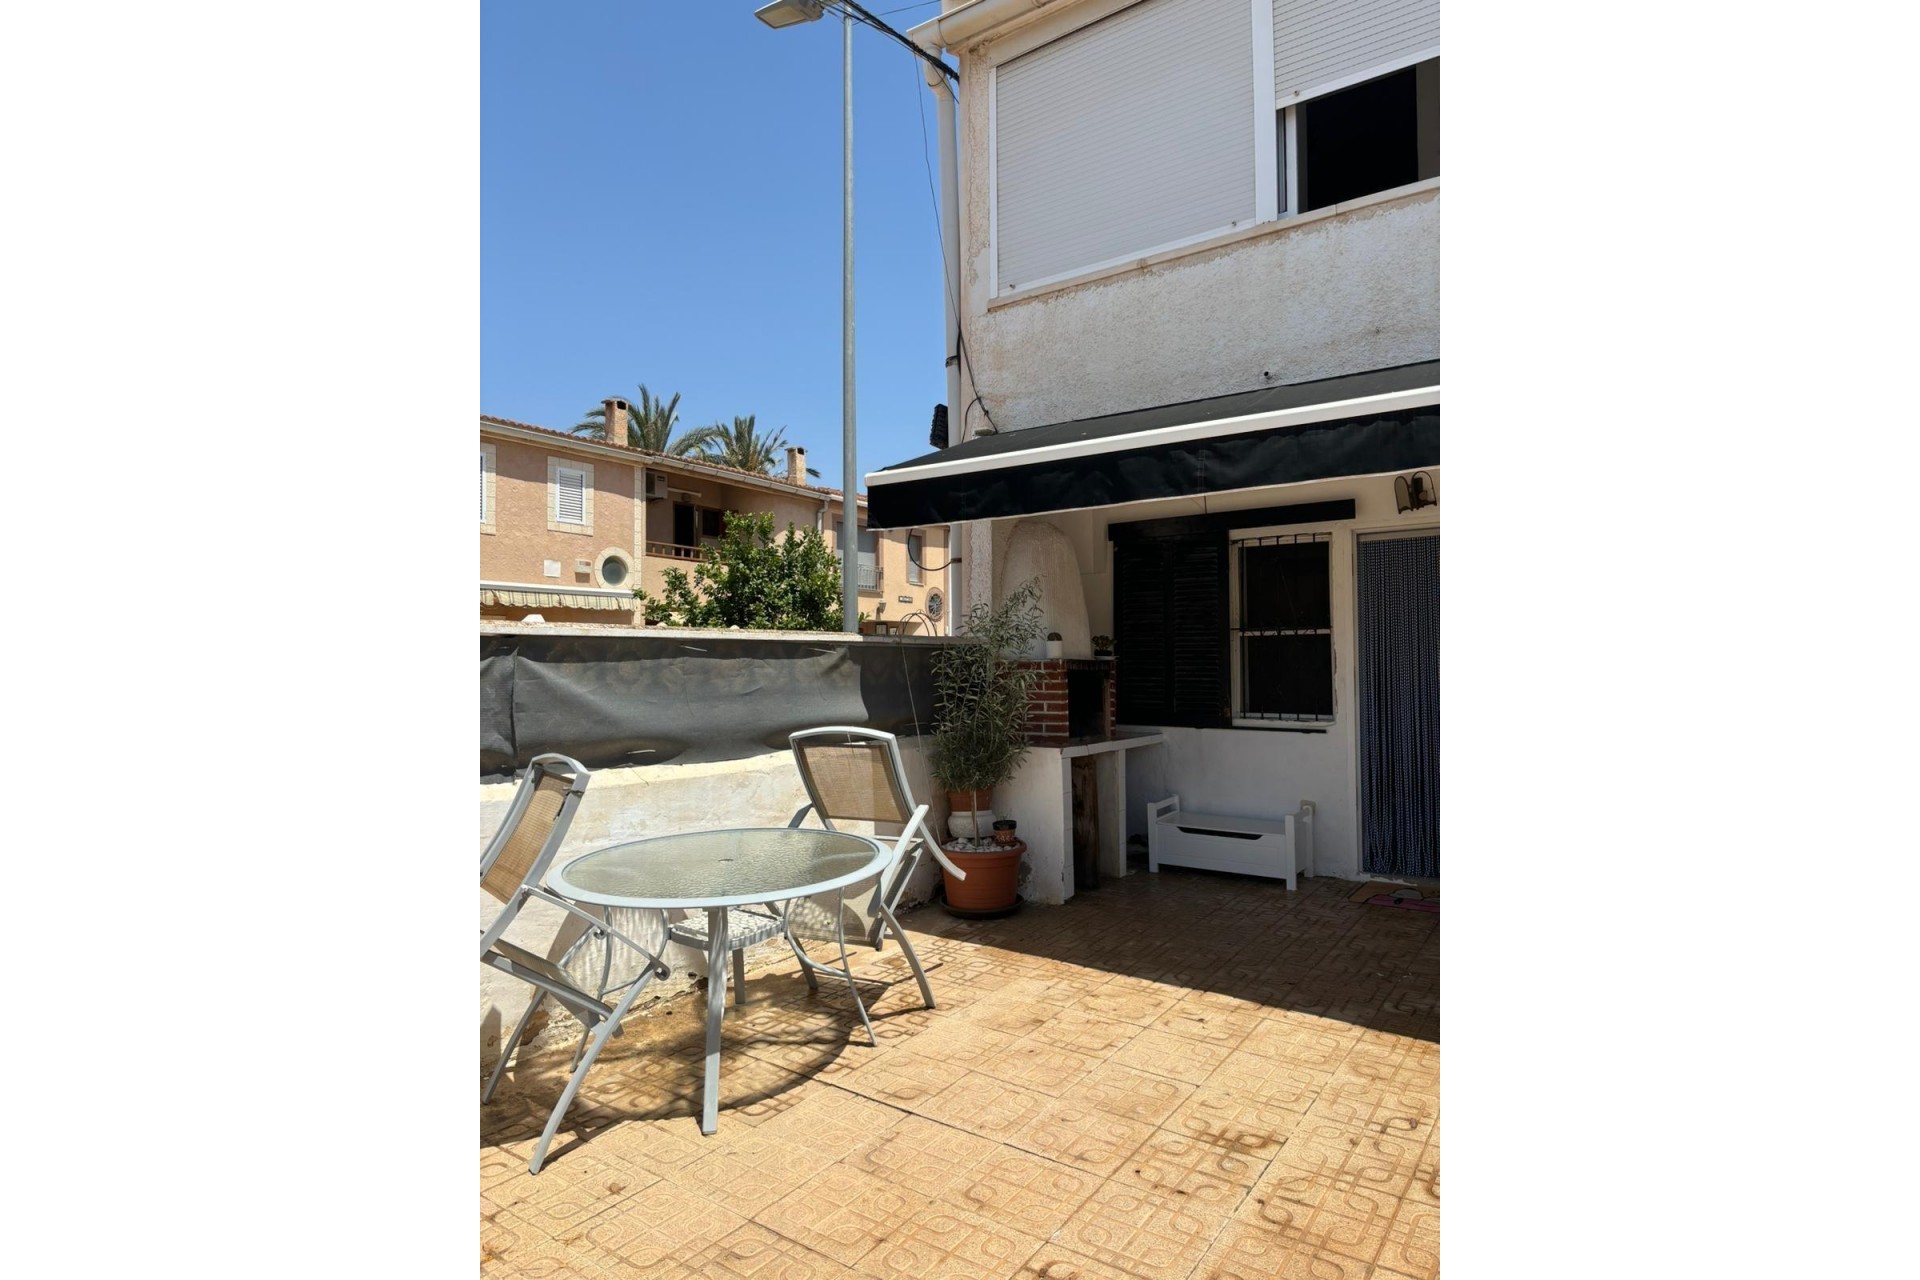 Reventa - Town House -
Torrevieja - Acequion